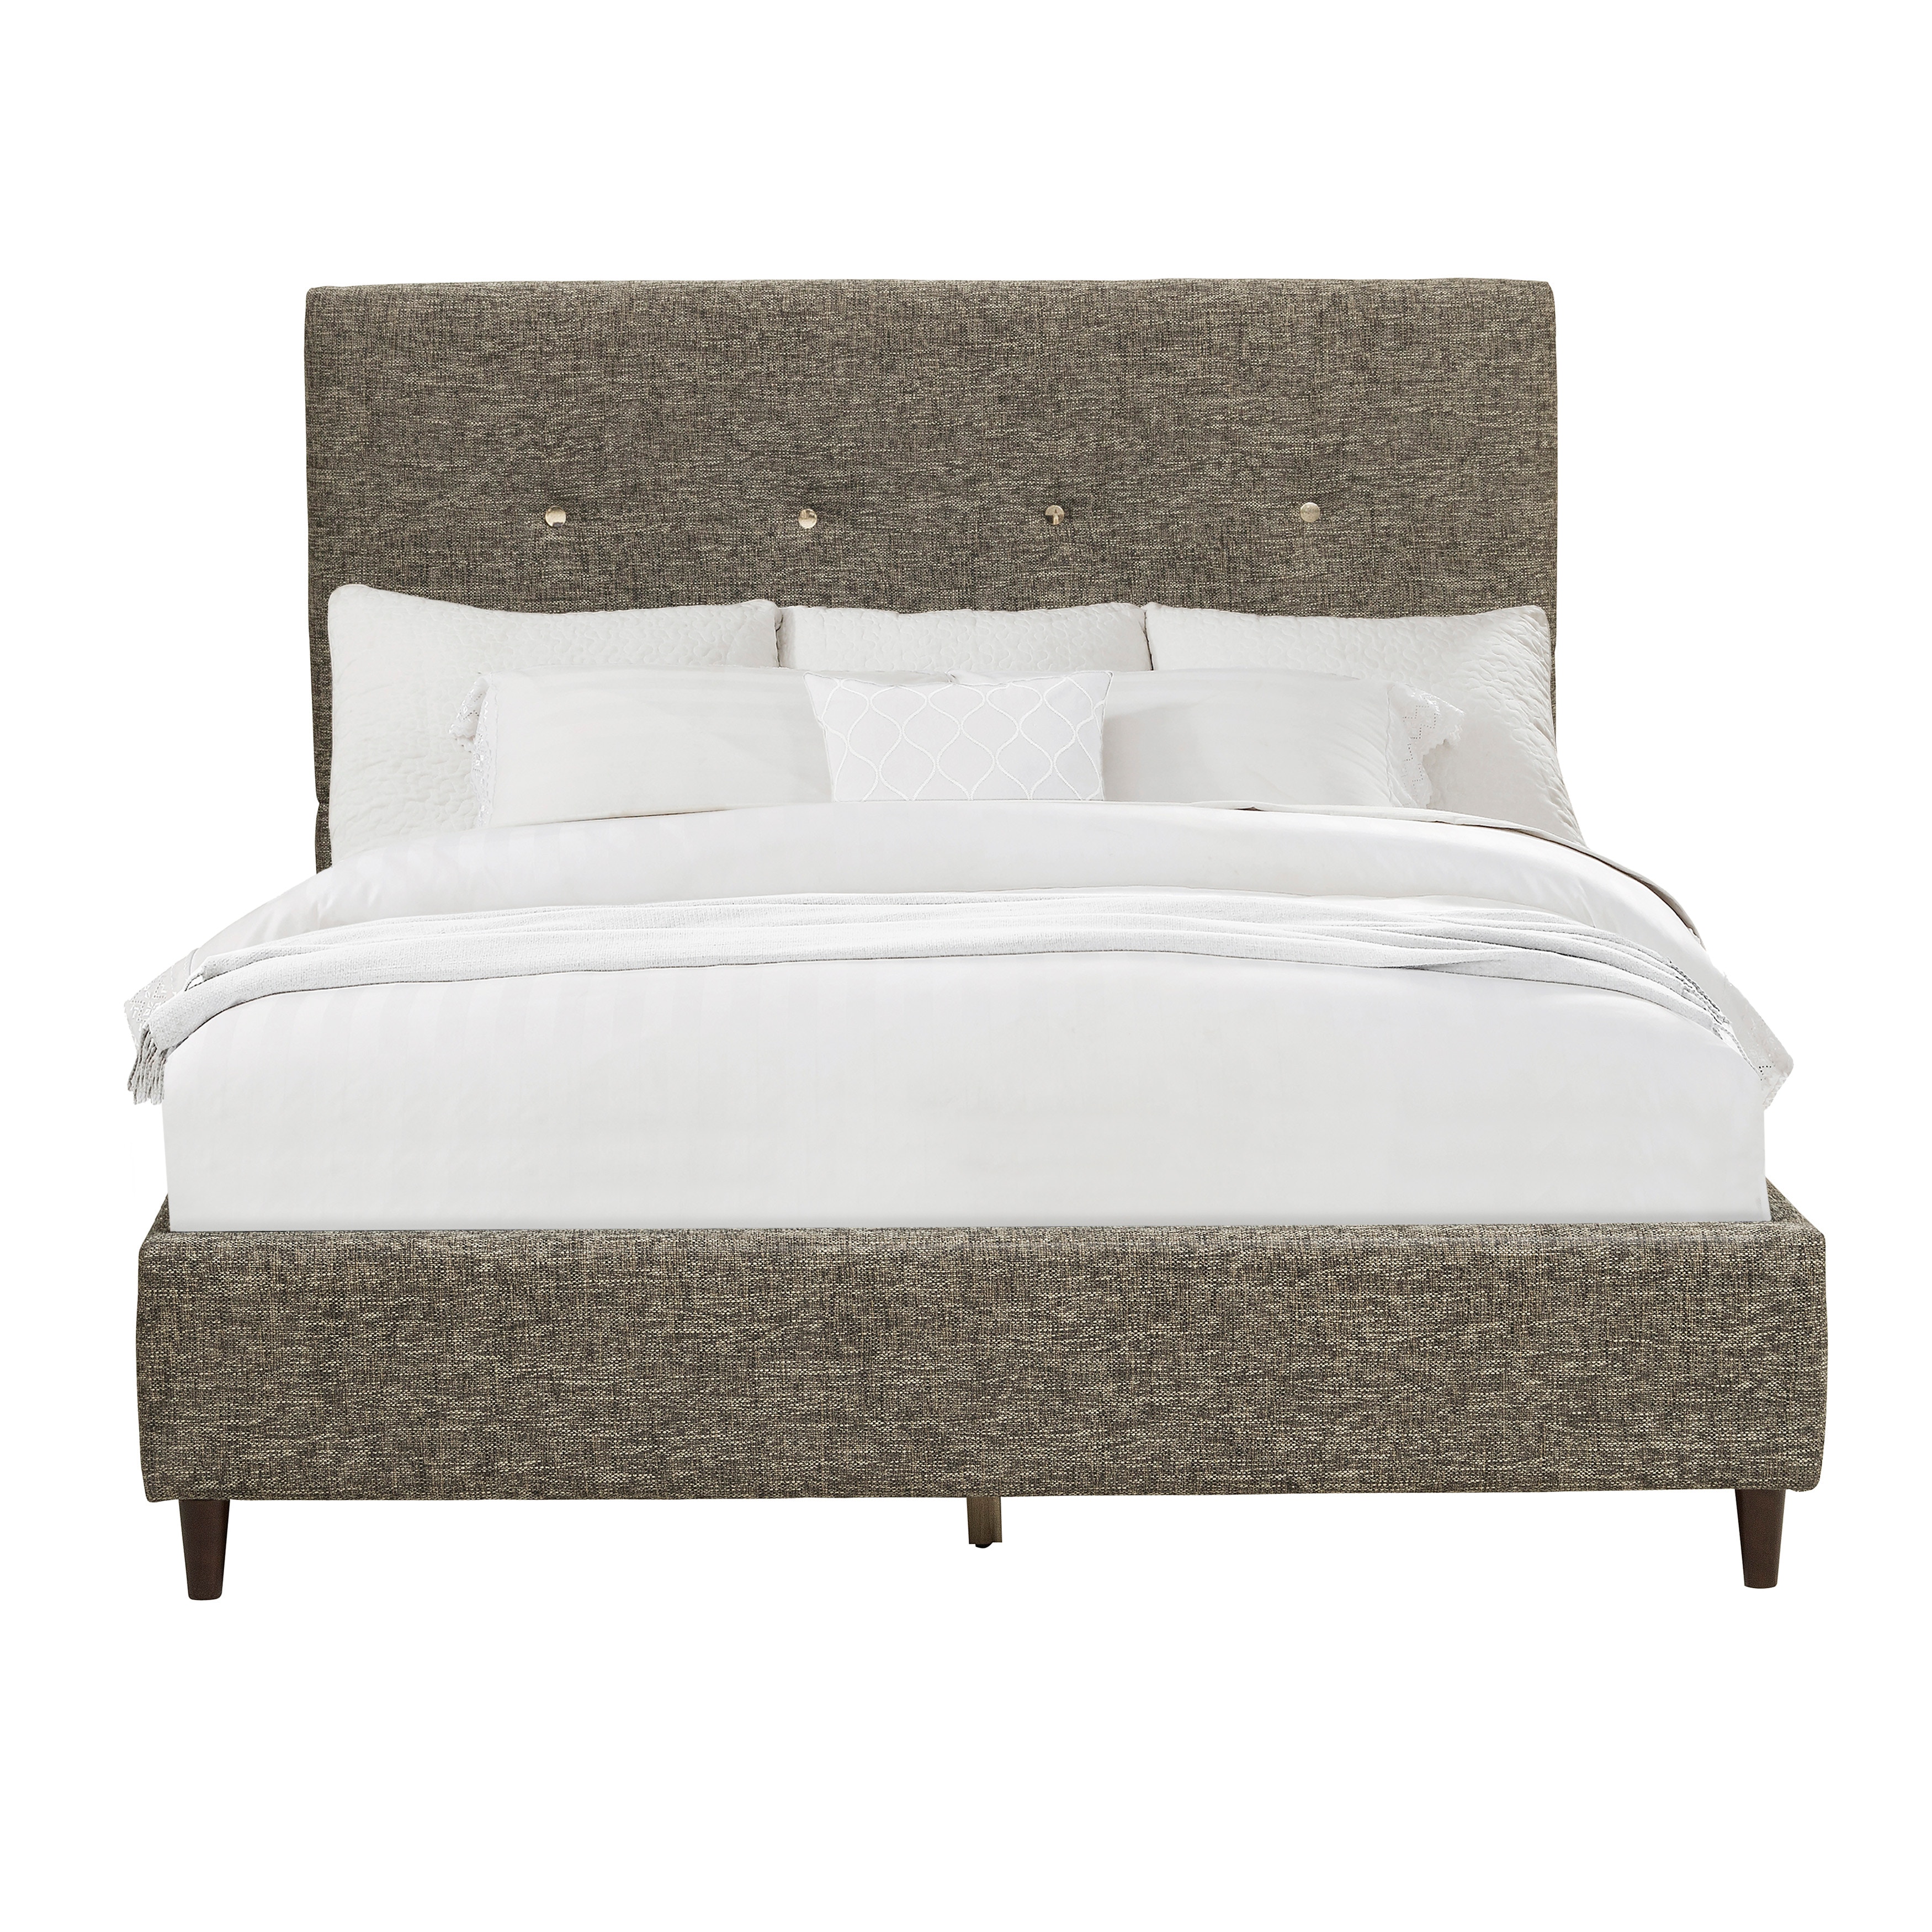 Accentrics Home D198-276 Bedroom 6-6 Gold Button Tufted